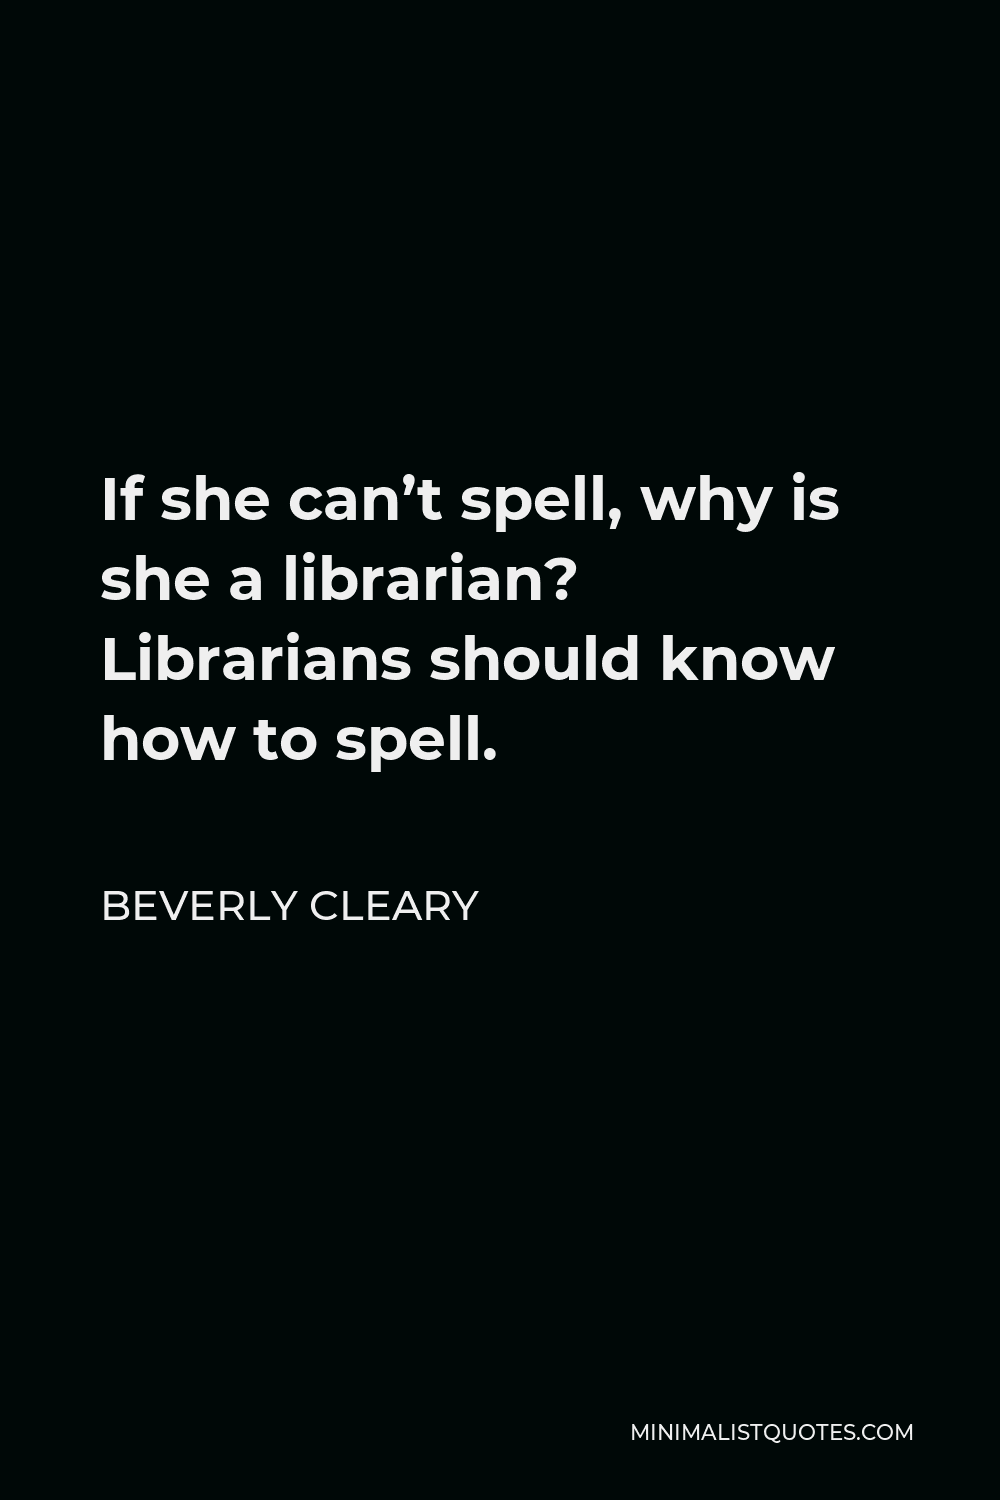 Beverly Cleary Quote - If she can’t spell, why is she a librarian? Librarians should know how to spell.